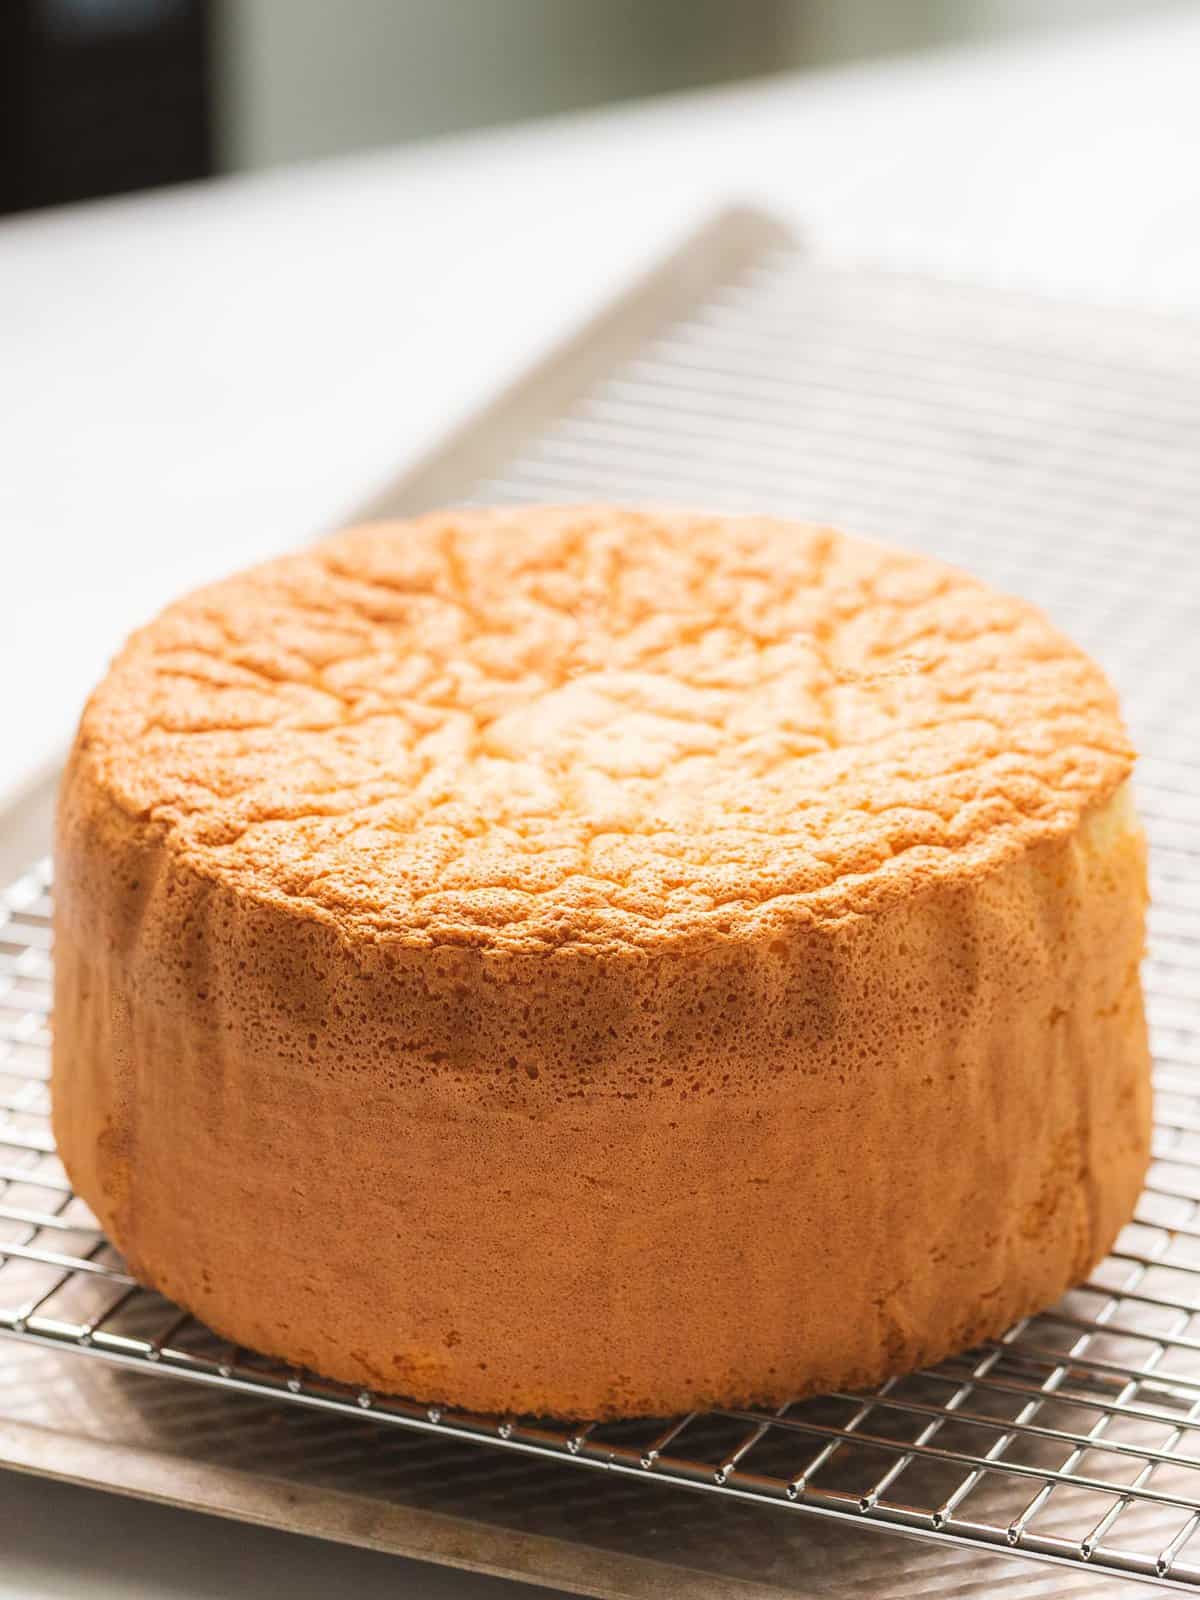 Soft and fluffy genoise sponge on a cooling rack.